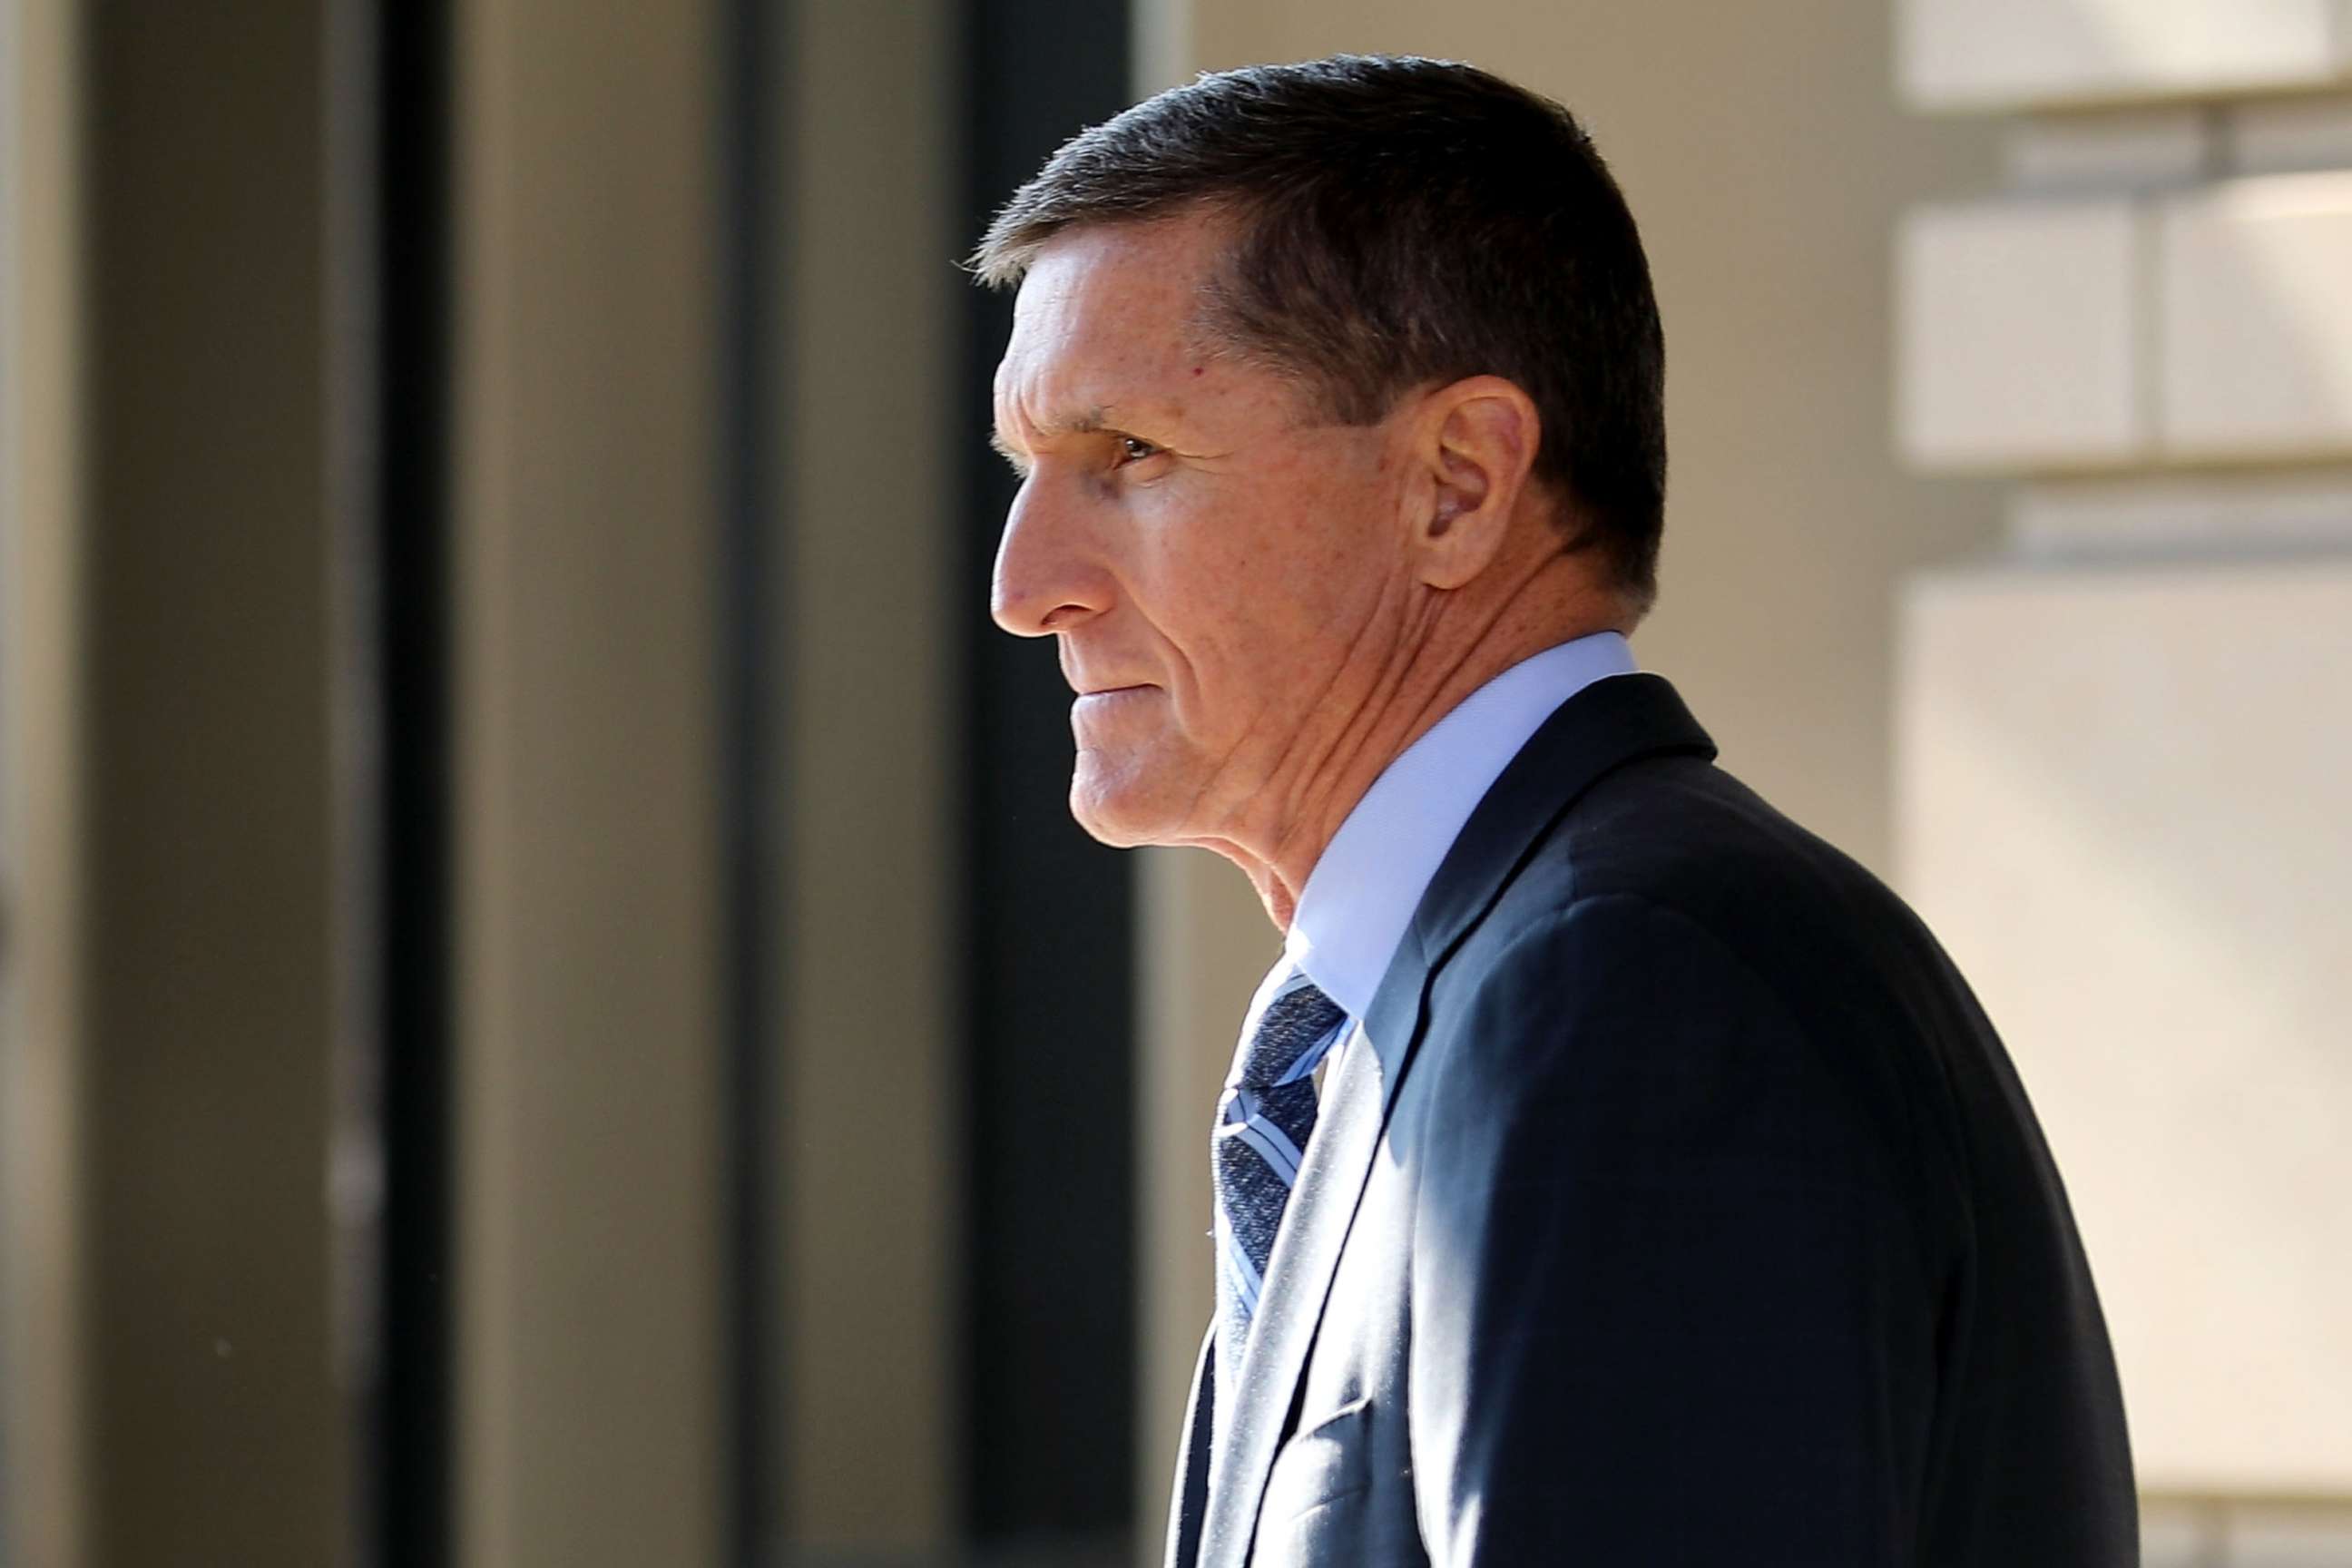 PHOTO: Michael Flynn, former national security advisor to President Donald Trump, leaves following a hearing at the Prettyman Federal Courthouse, Dec. 1, 2017 in Washington, D.C.